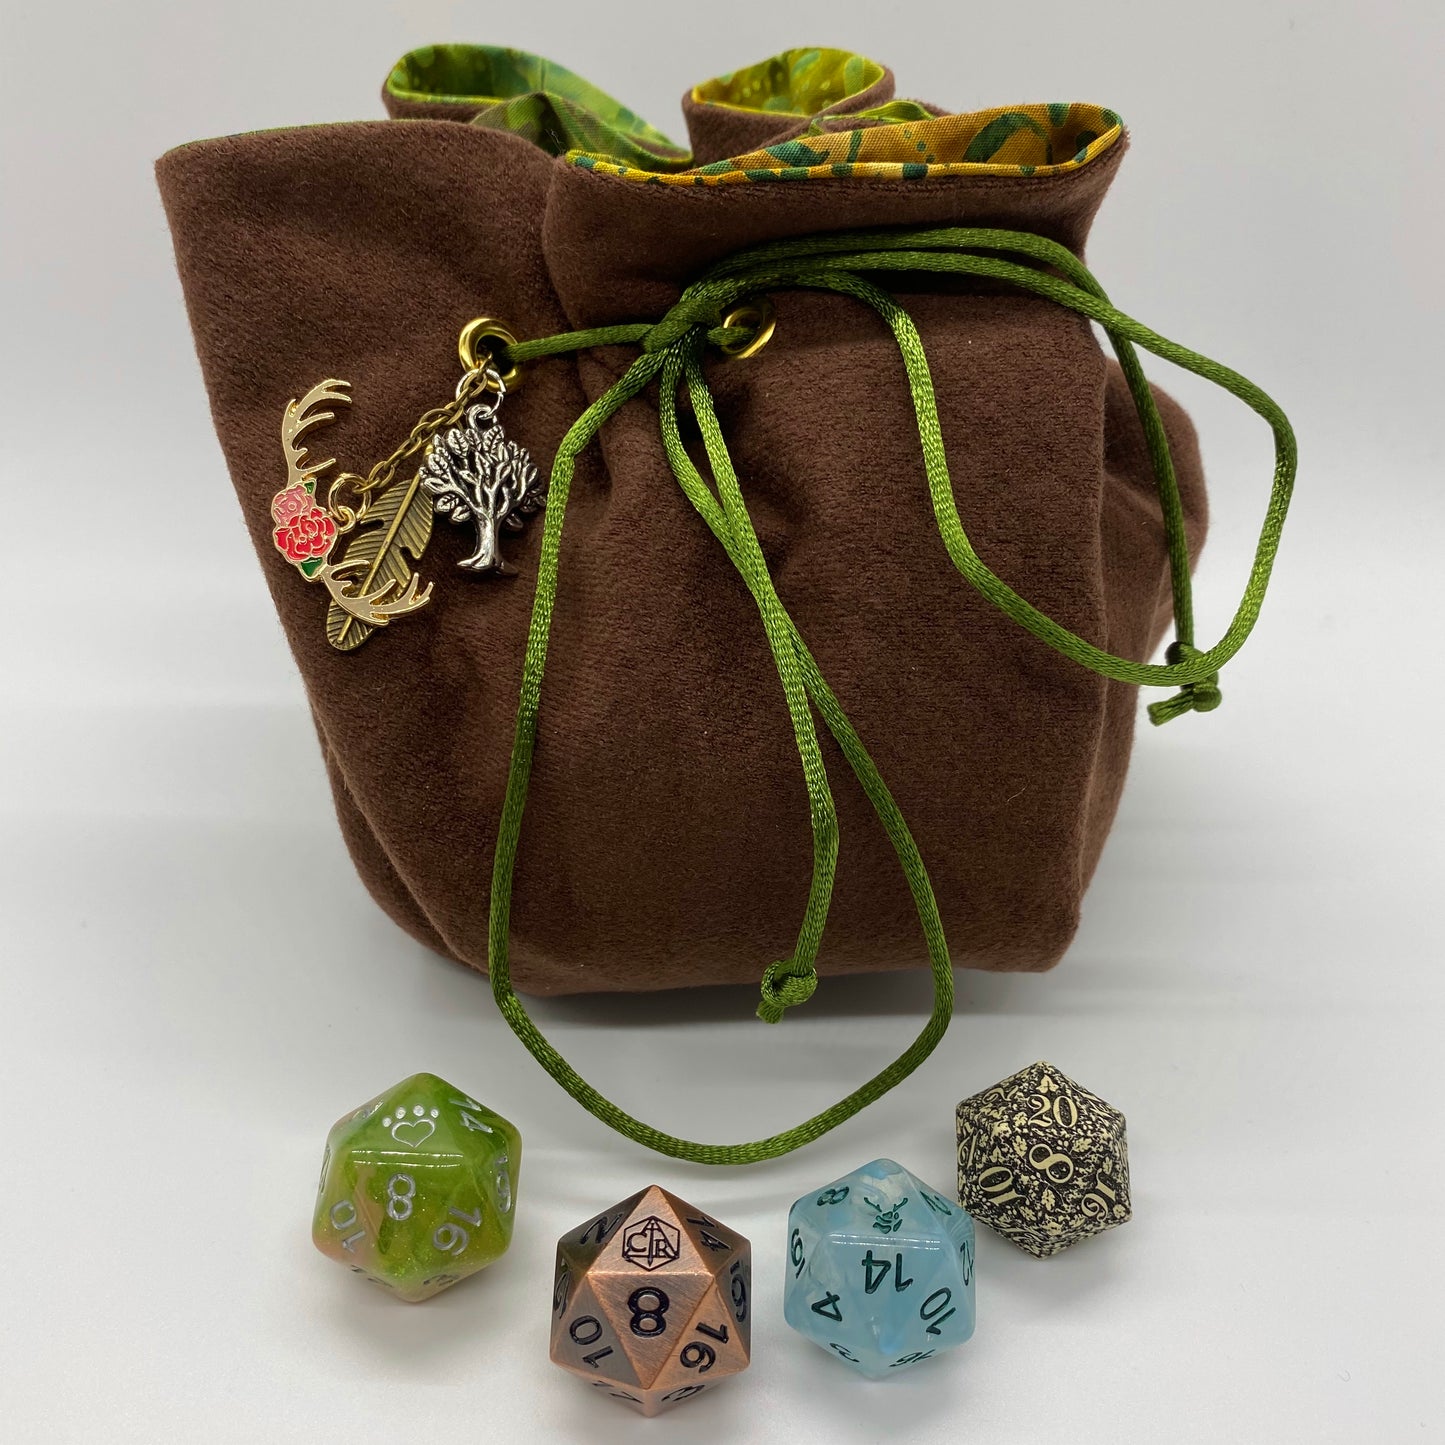 Voice of the Tempest Dice Bag